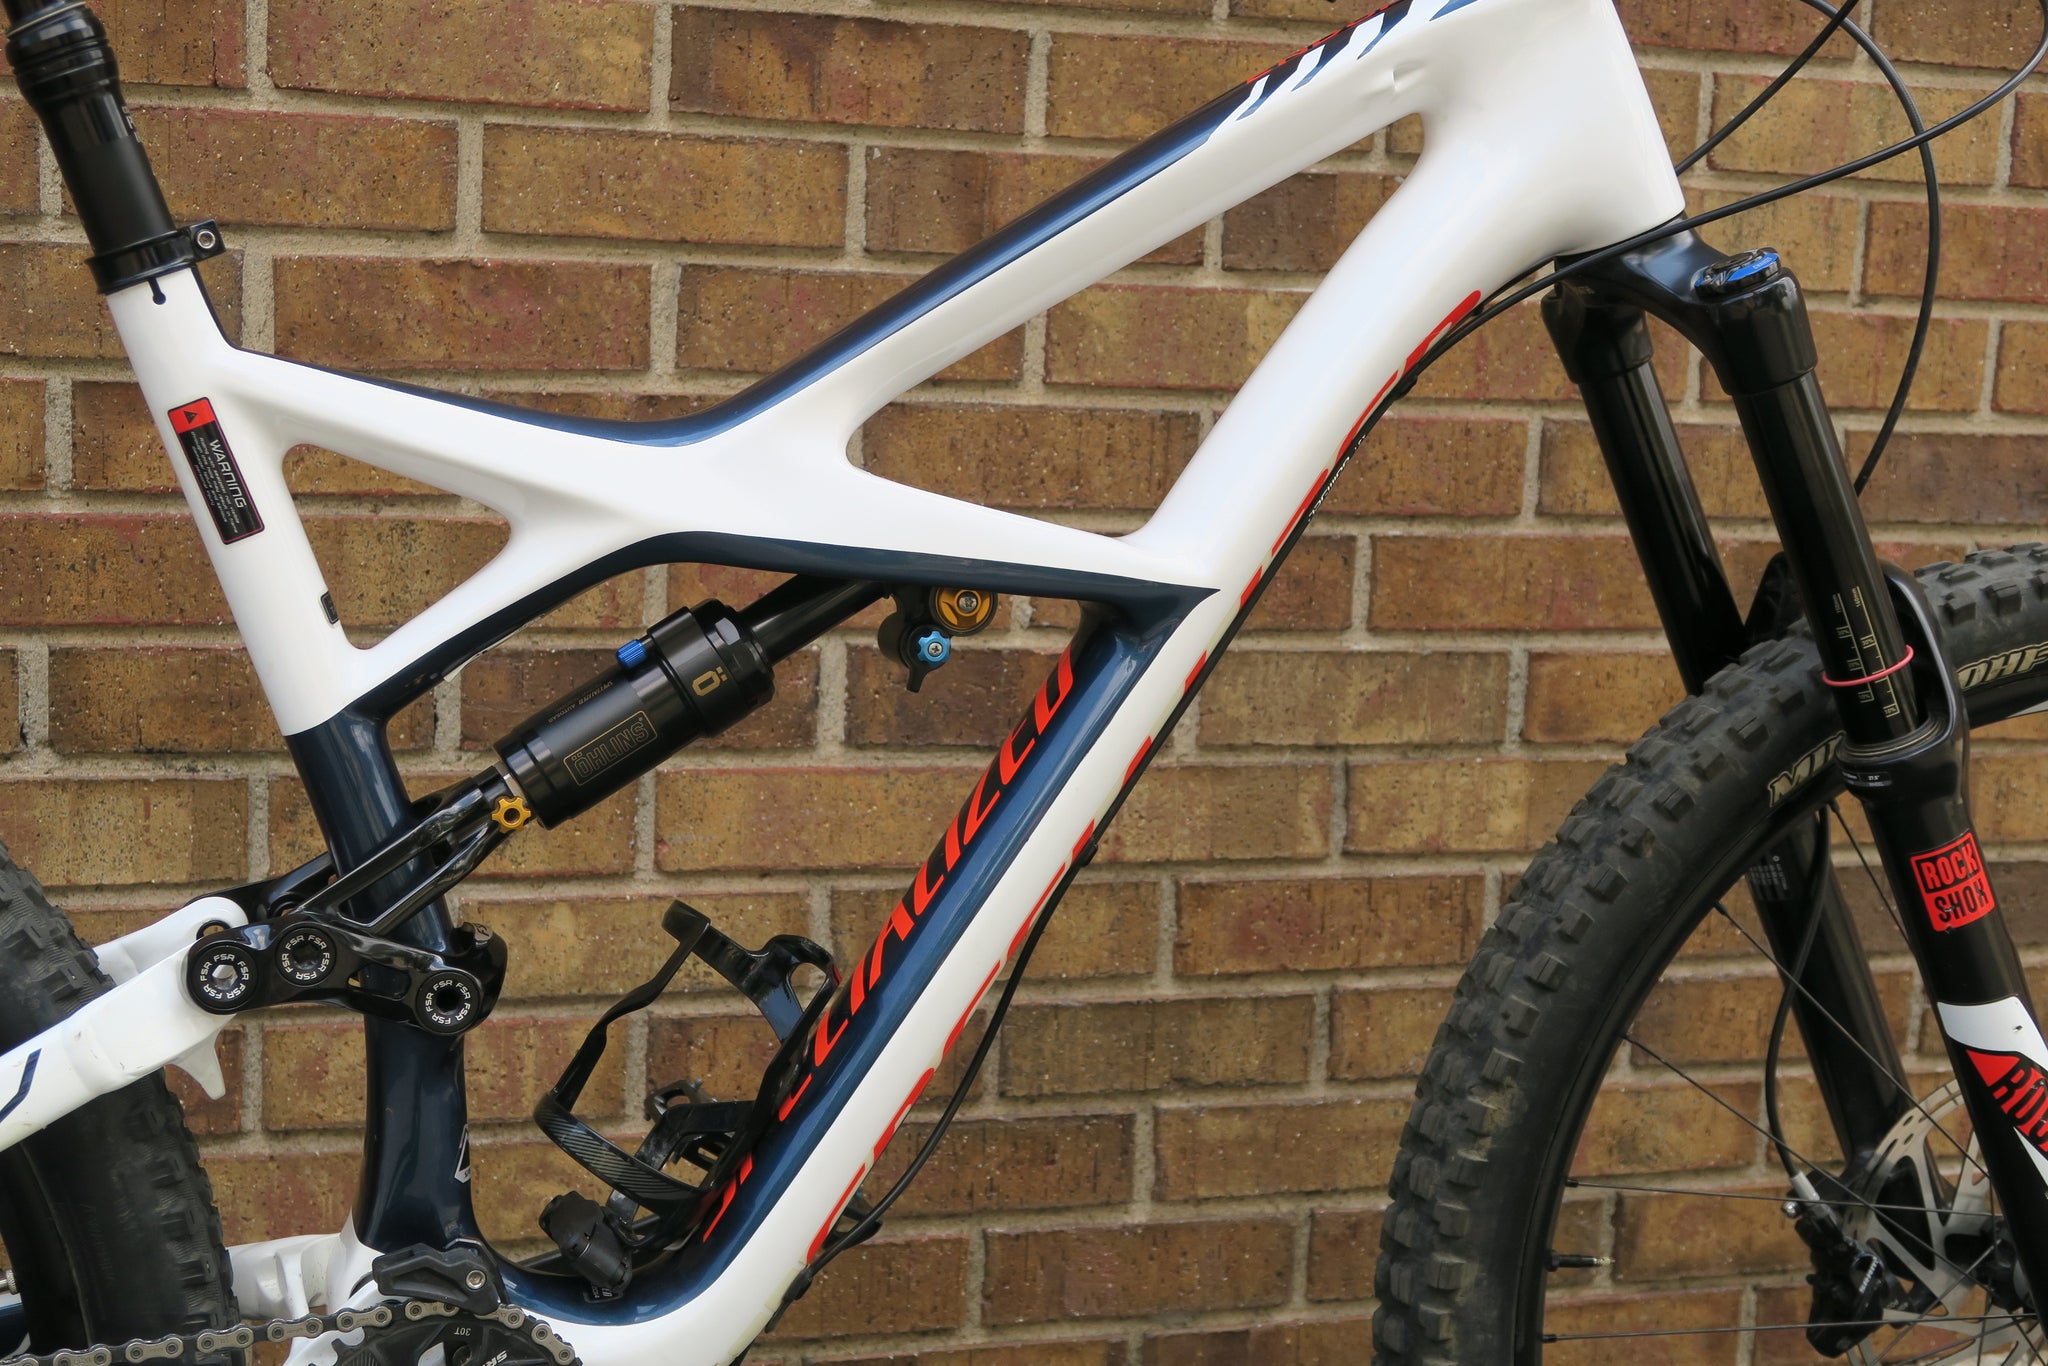 2016 SPECIALIZED ENDURO EXPERT CARBON 650B 27.5"